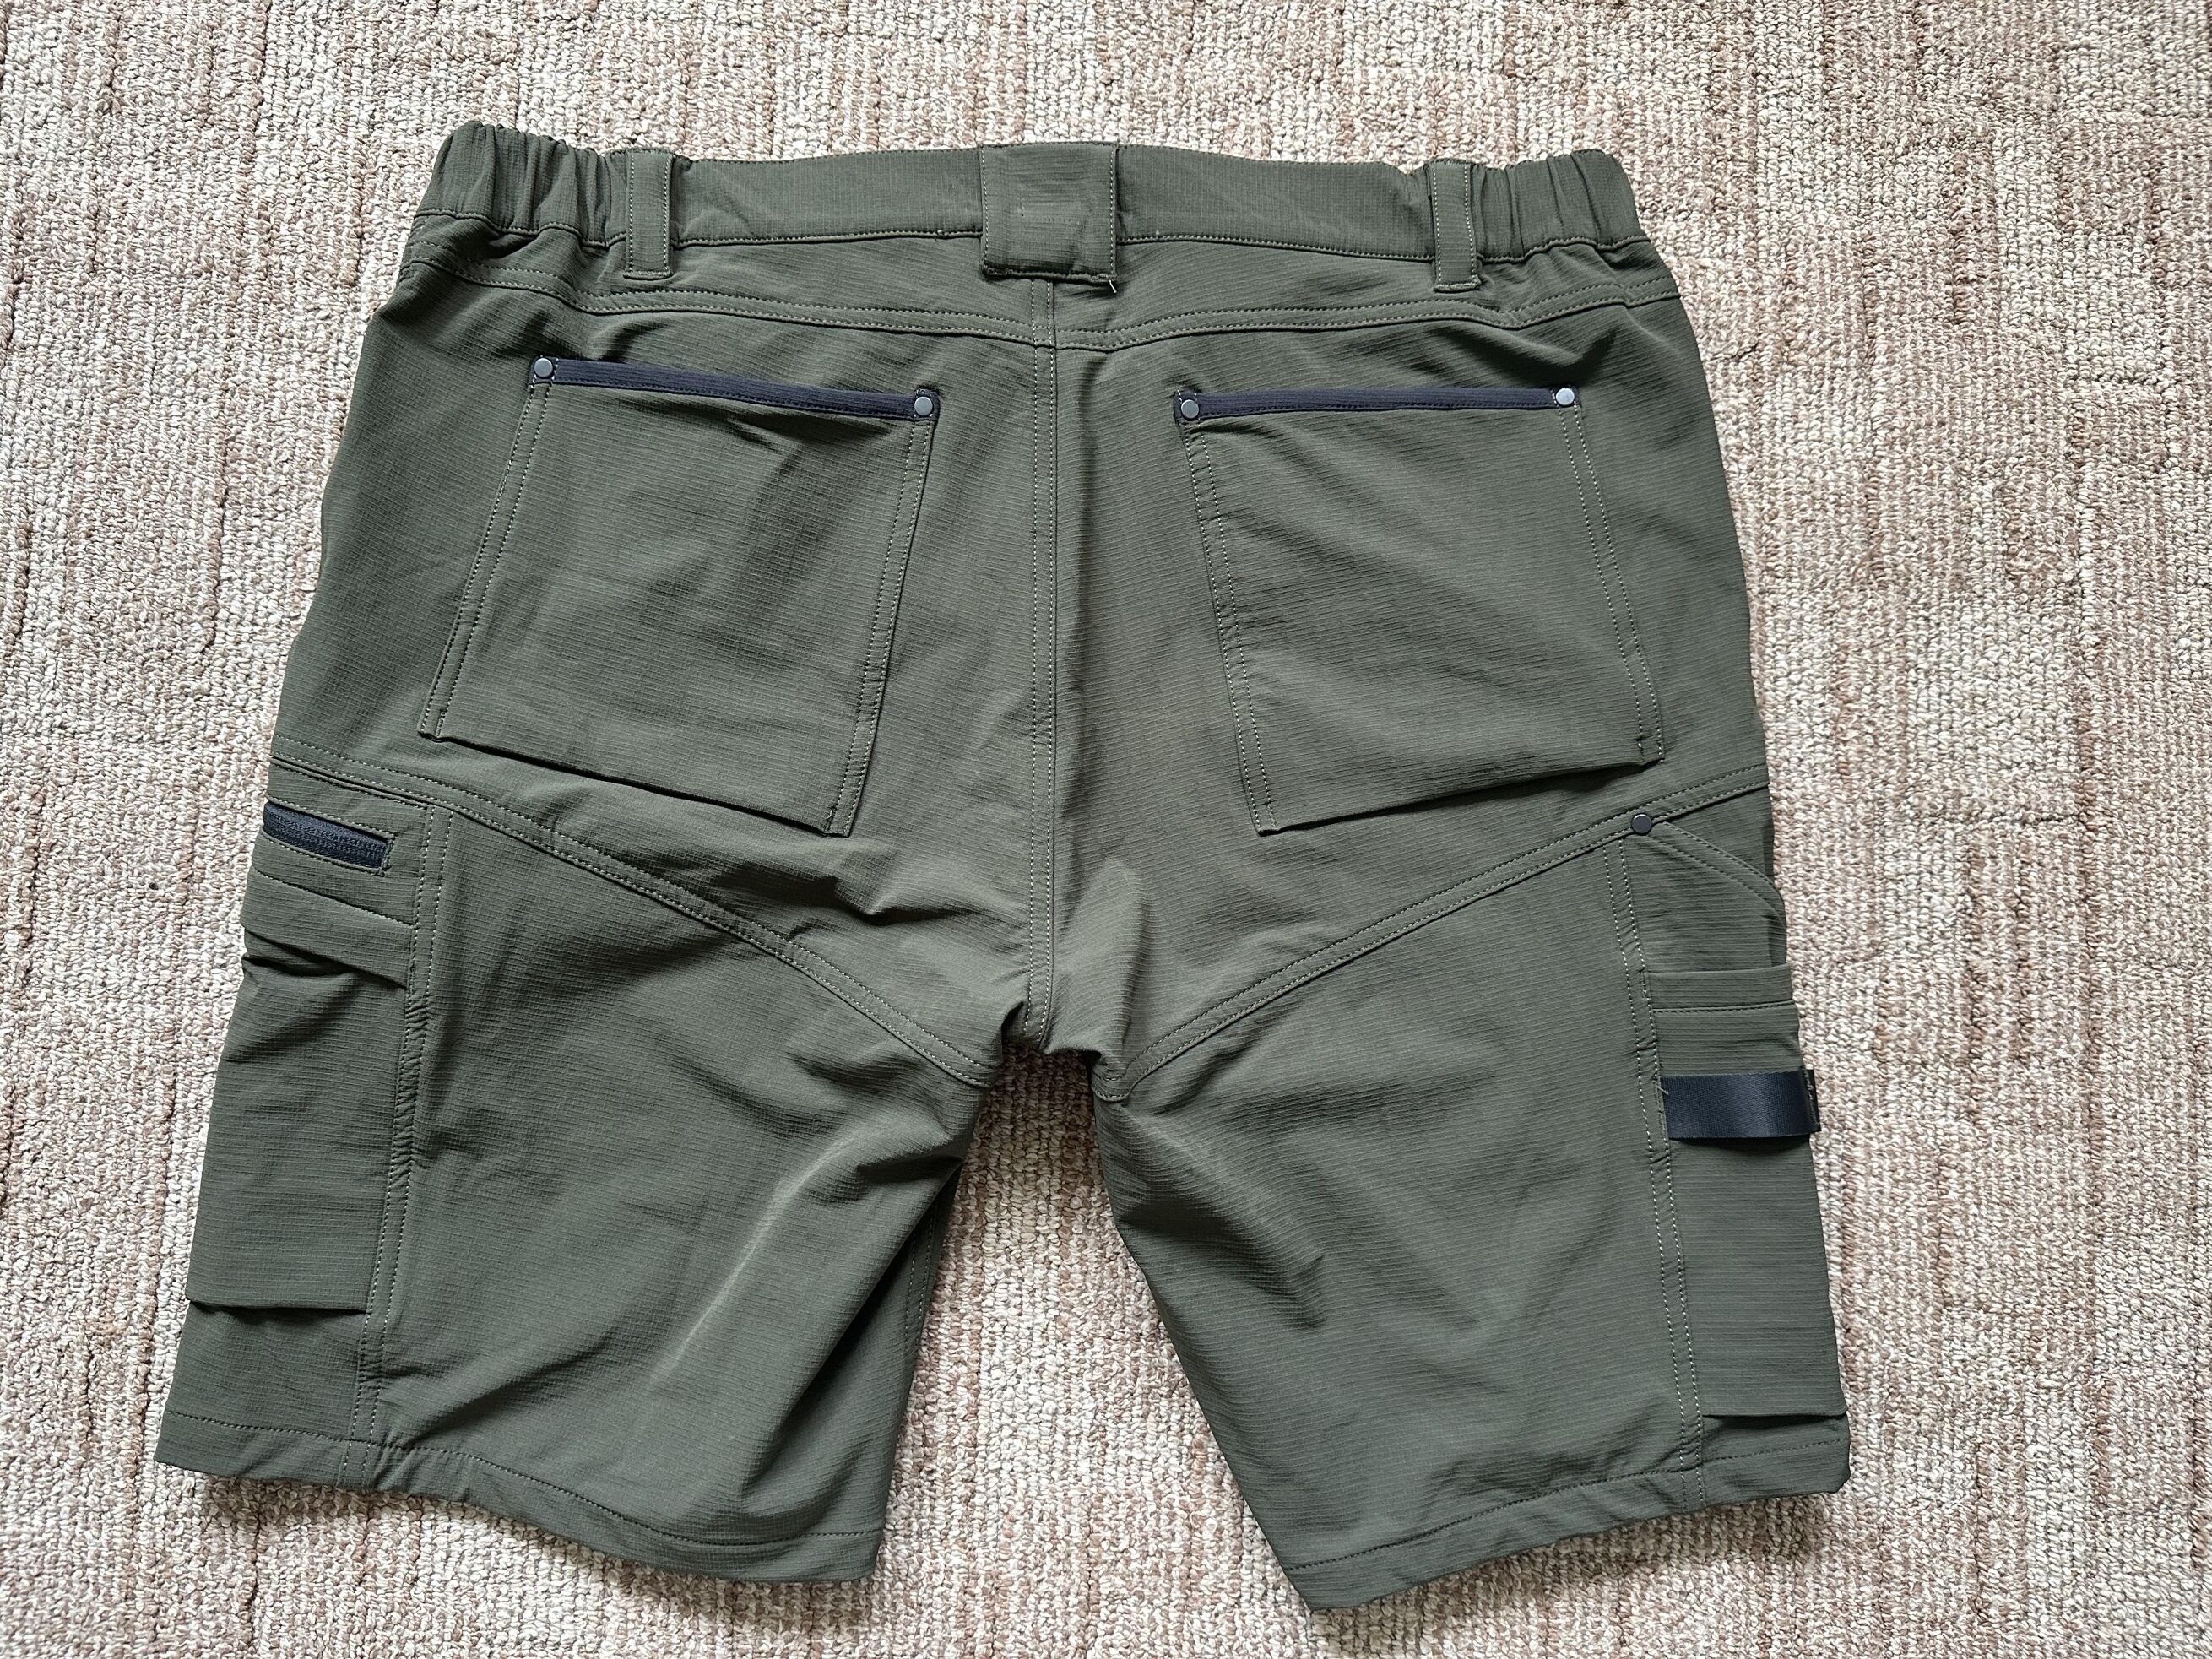 Buy Wholesale China Factory Supply Army Green Short Pants Stretch Work ...